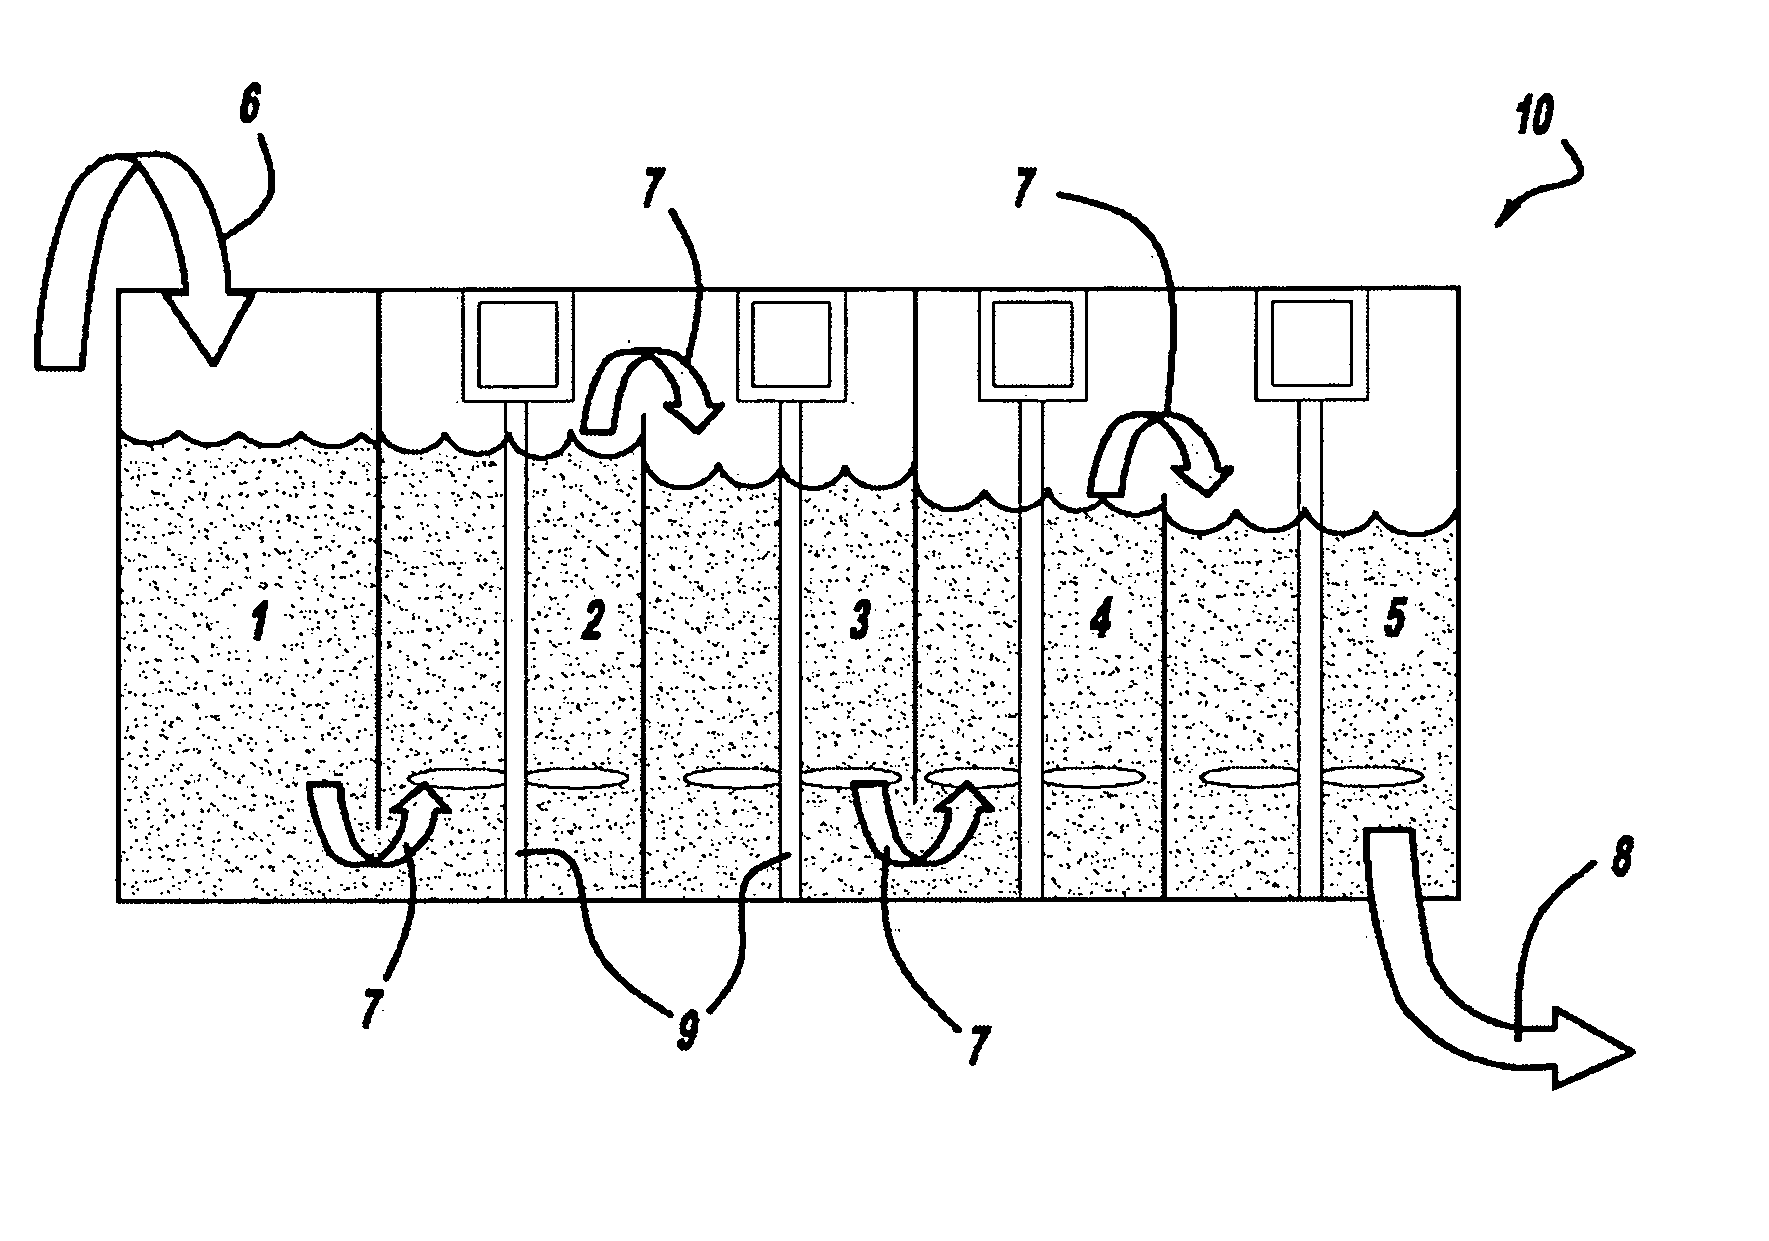 Method and composition of preparing polymeric fracturing fluids